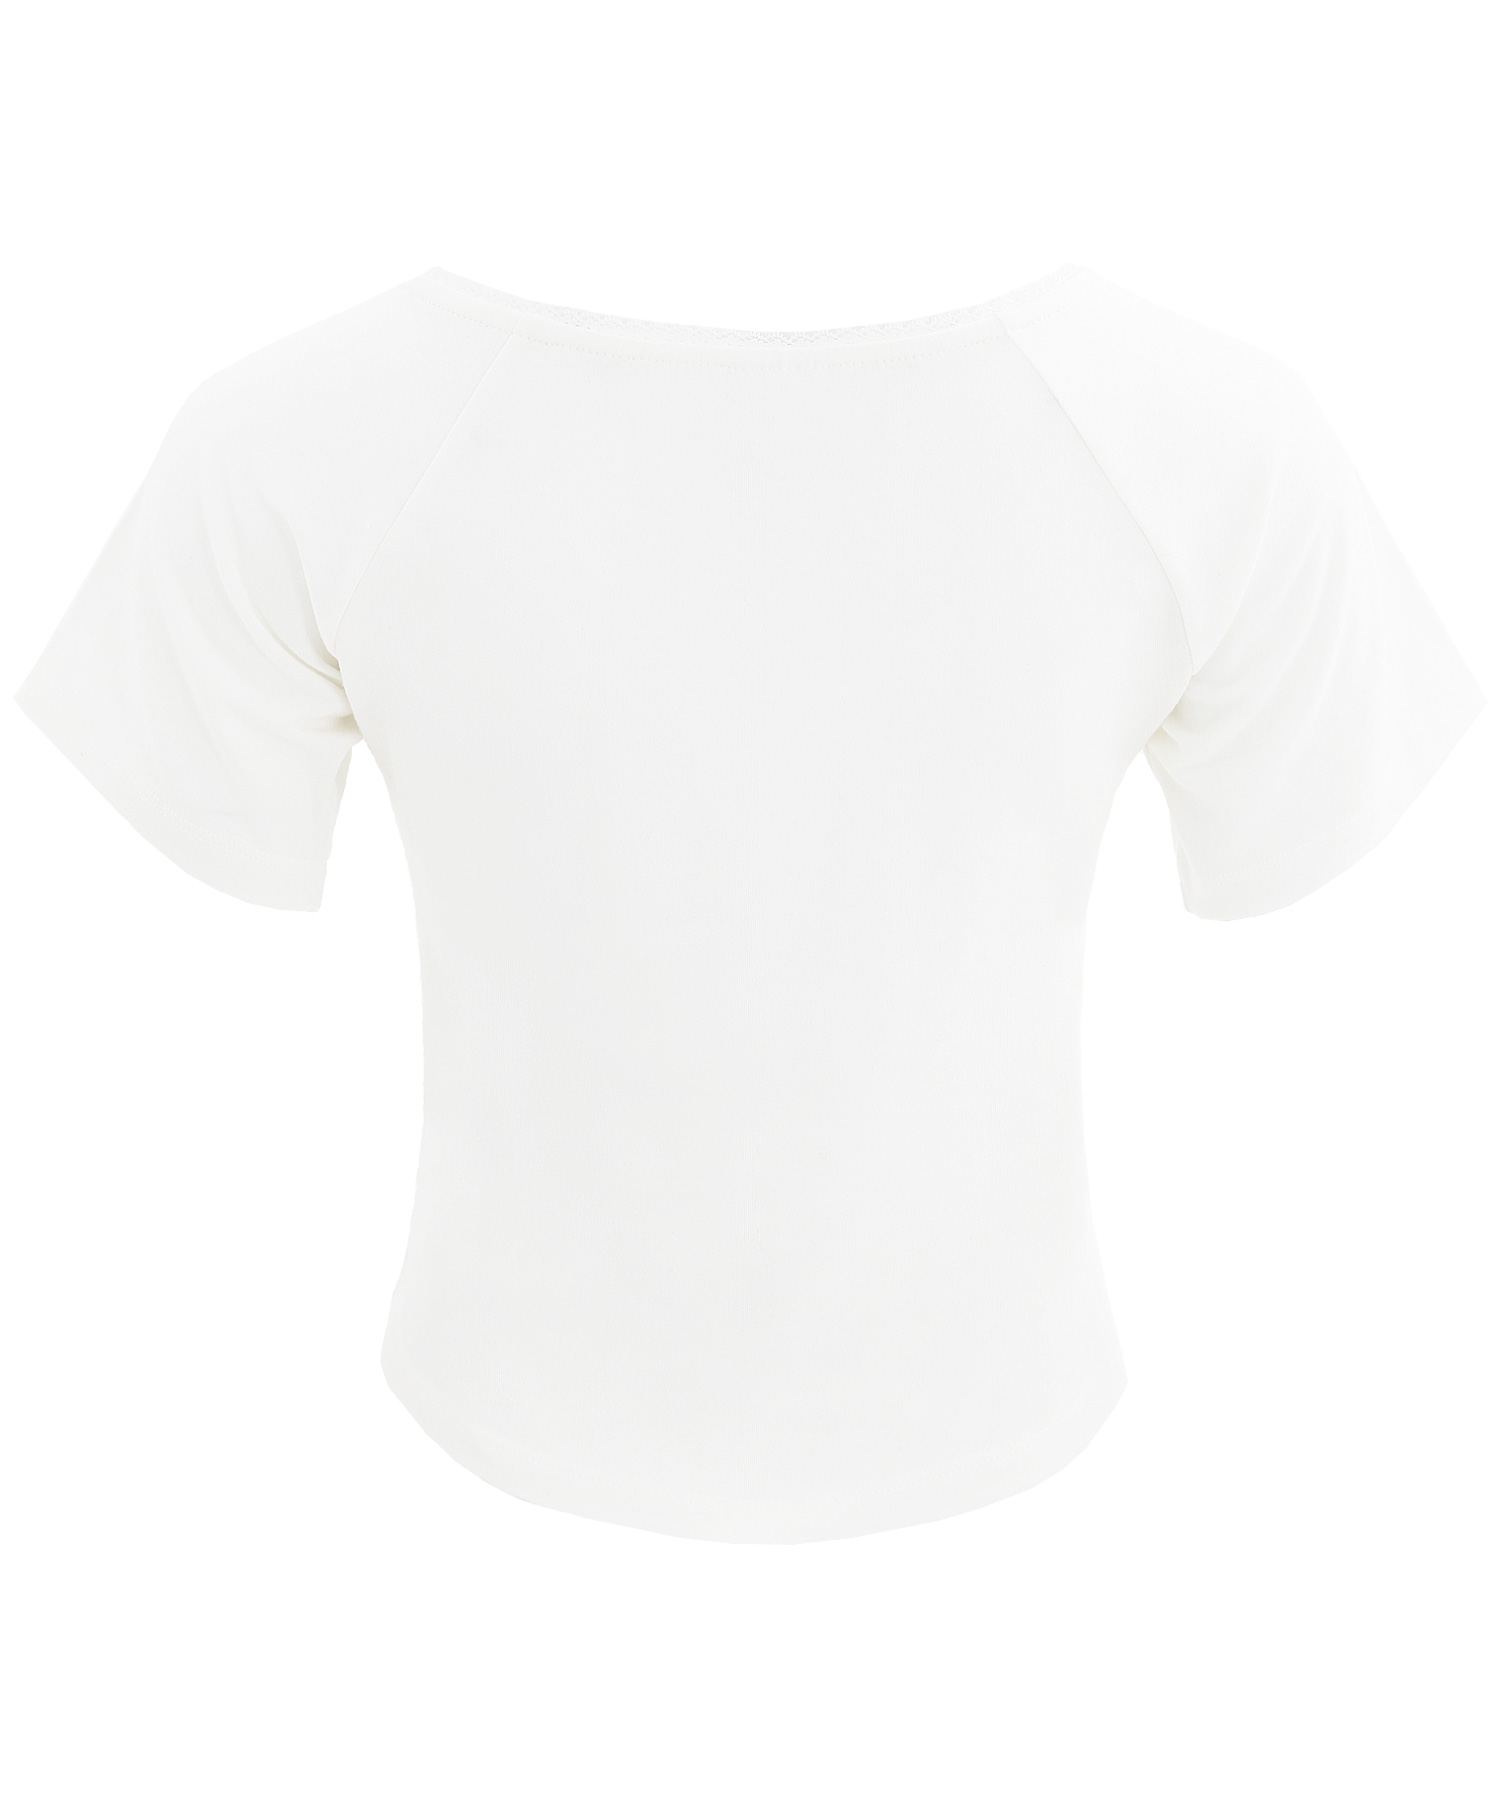 HOOK T-SHIRT IN WHITE pre-order delivery May 30th